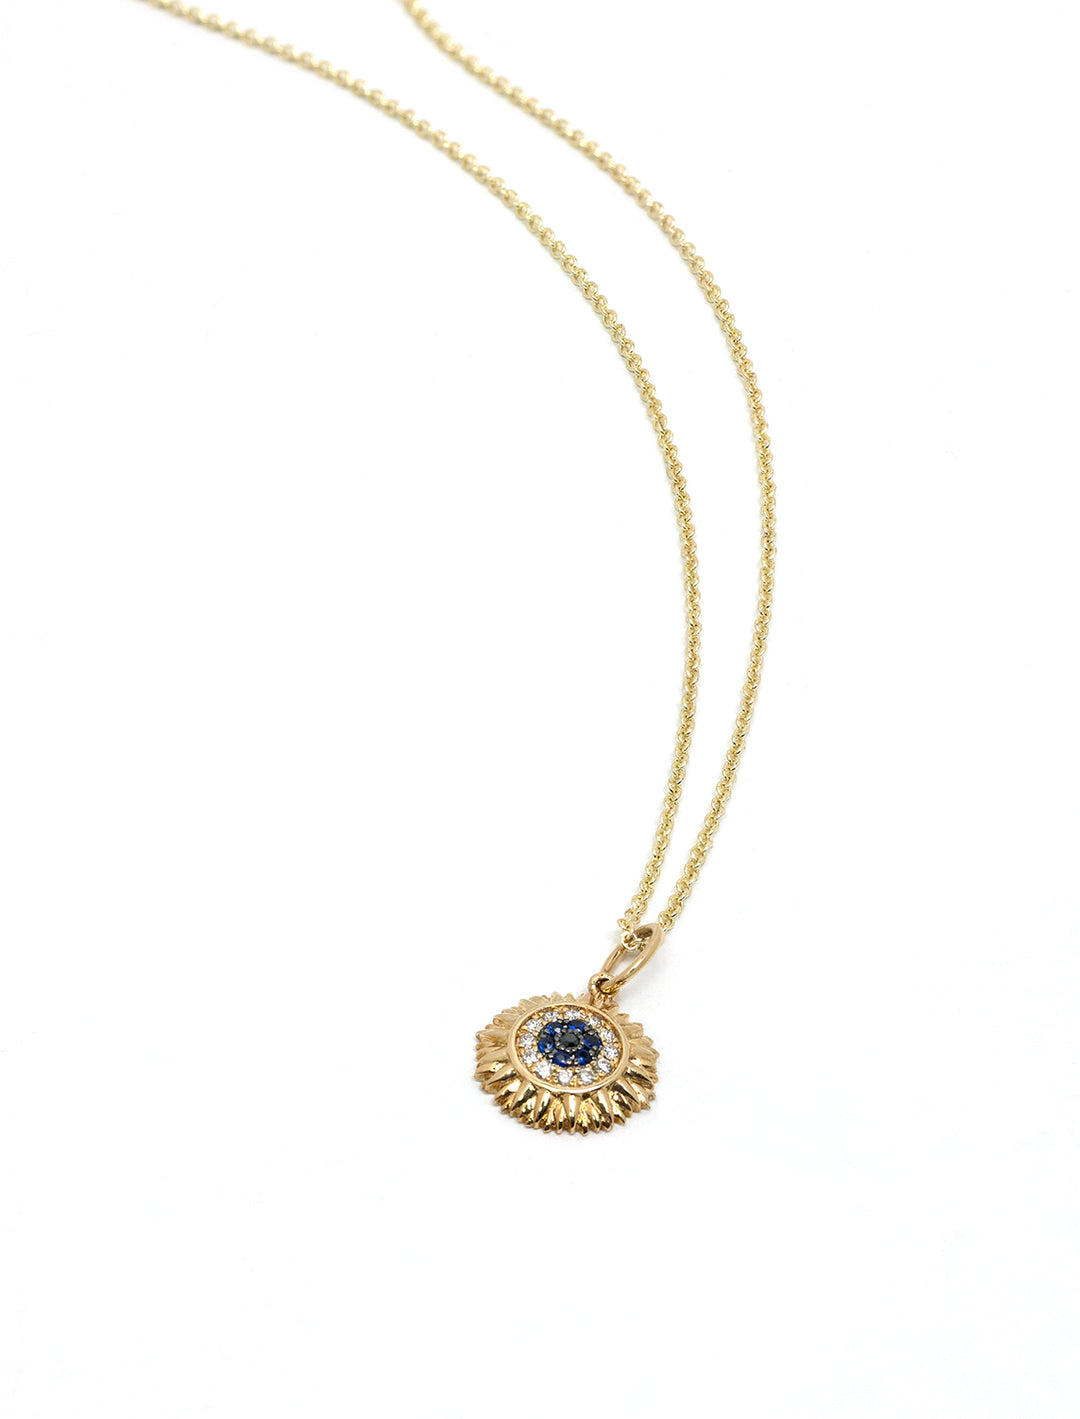 Close-up view of Sydney Evan's pave sunflower charm necklace with sapphire and diamond.